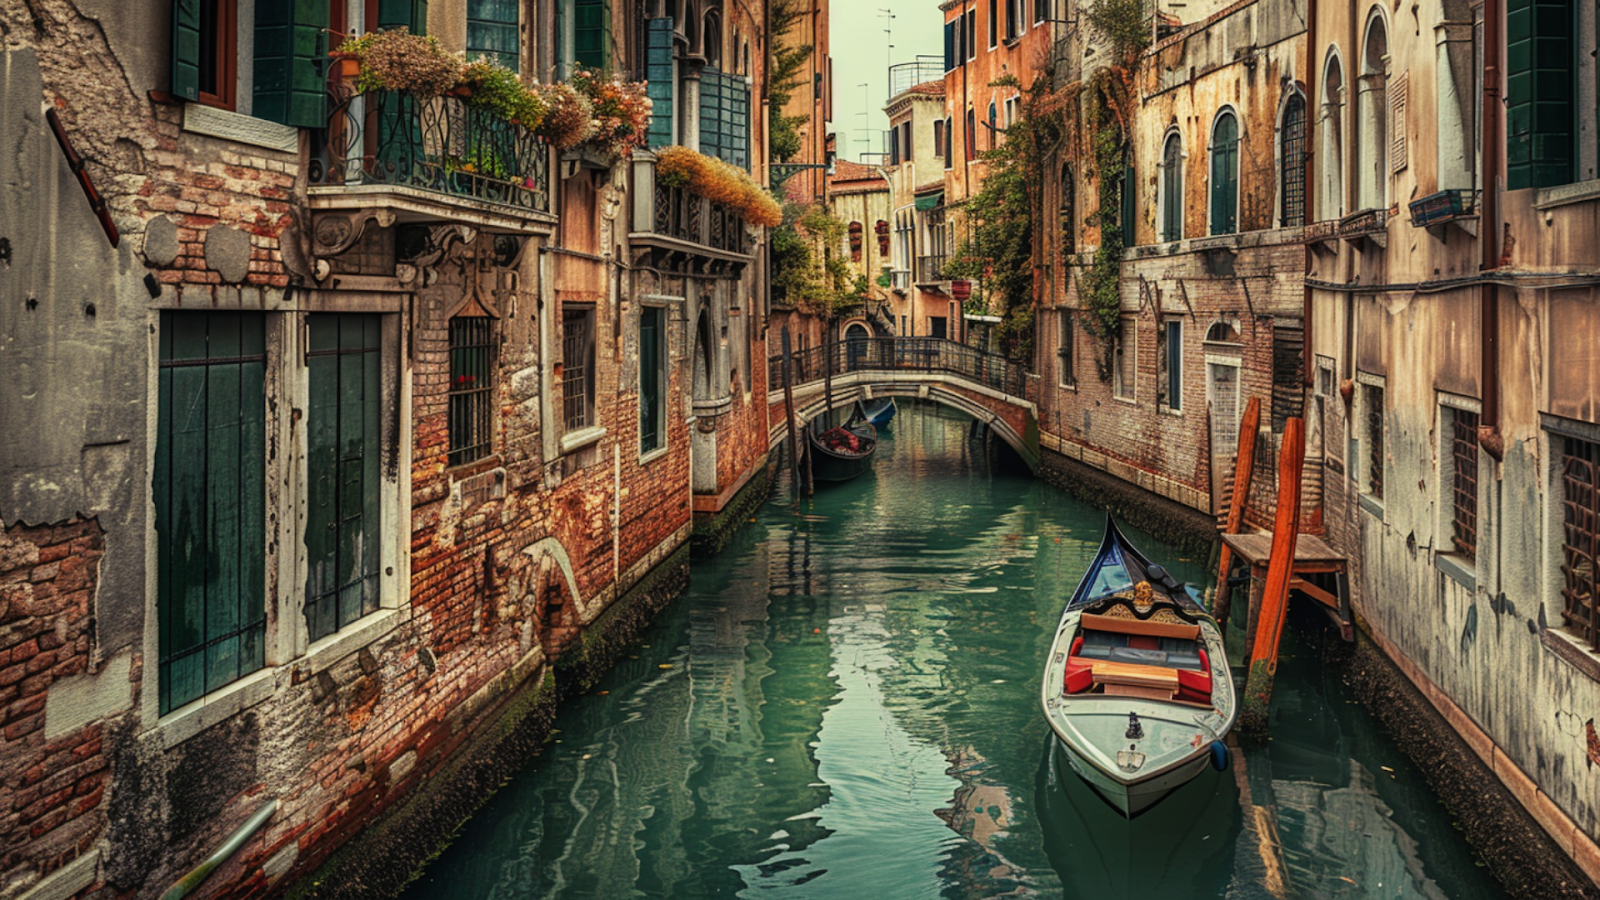 A small canal in between houses in Venice